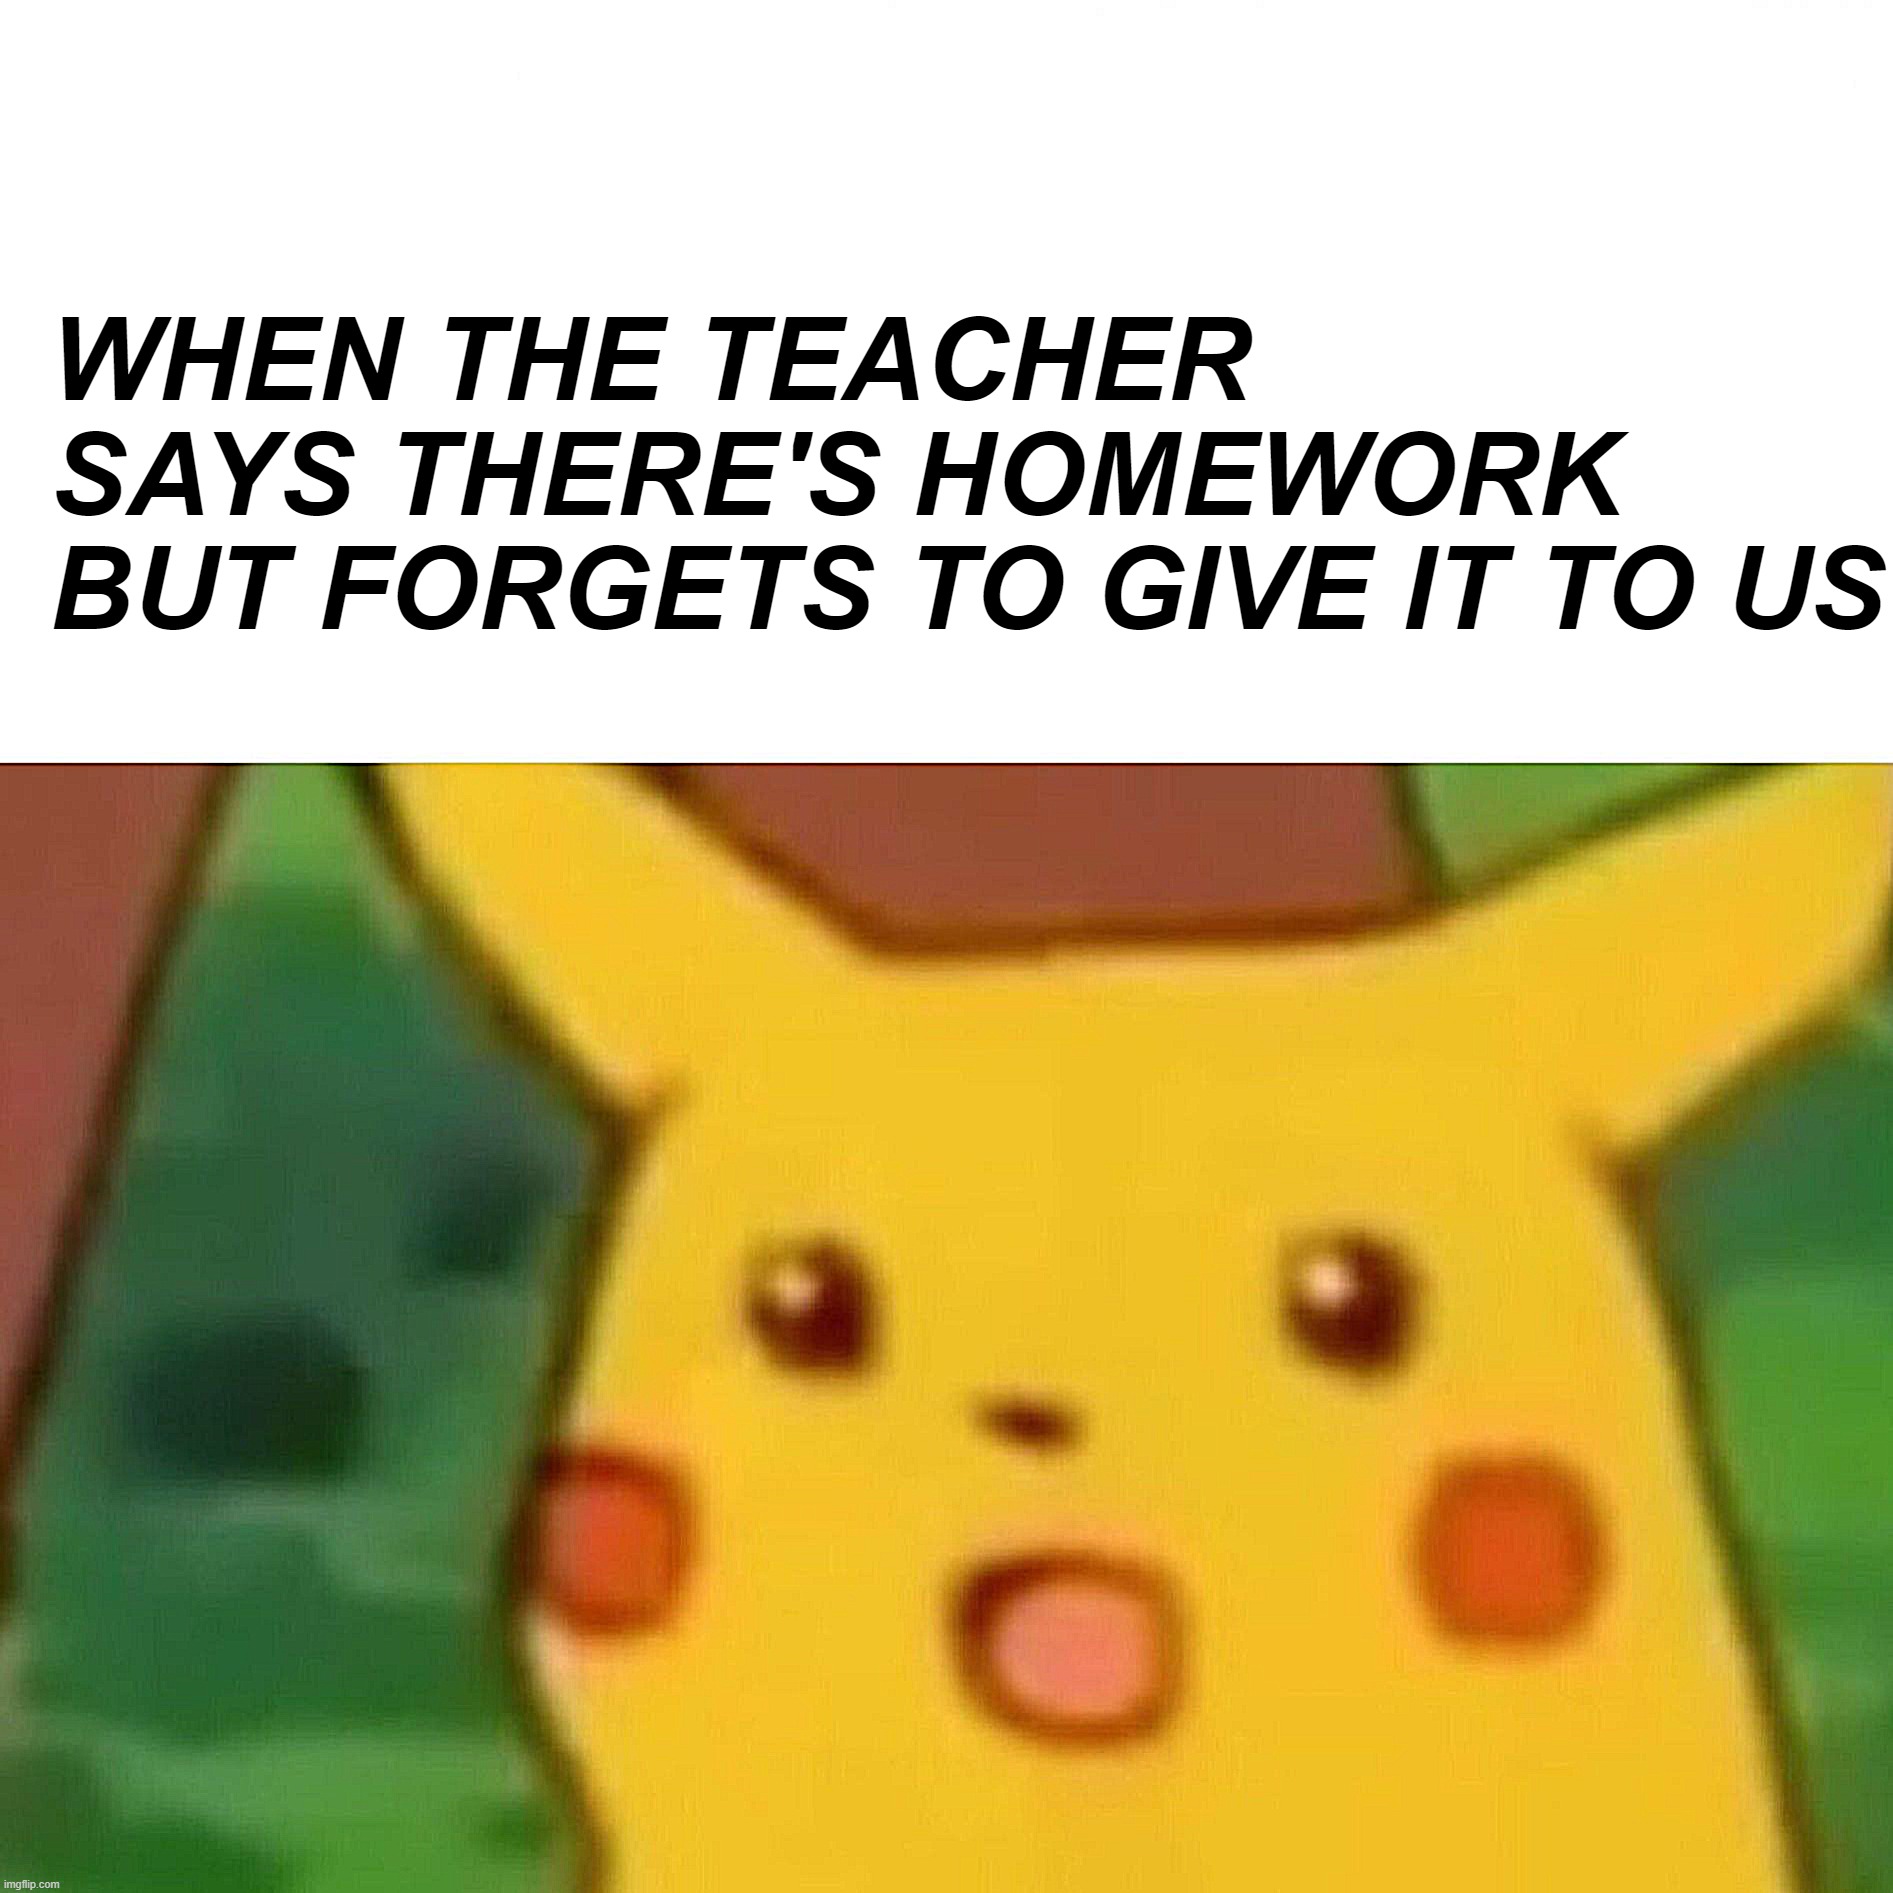 Surprised Pikachu | WHEN THE TEACHER SAYS THERE'S HOMEWORK BUT FORGETS TO GIVE IT TO US | image tagged in memes,surprised pikachu | made w/ Imgflip meme maker